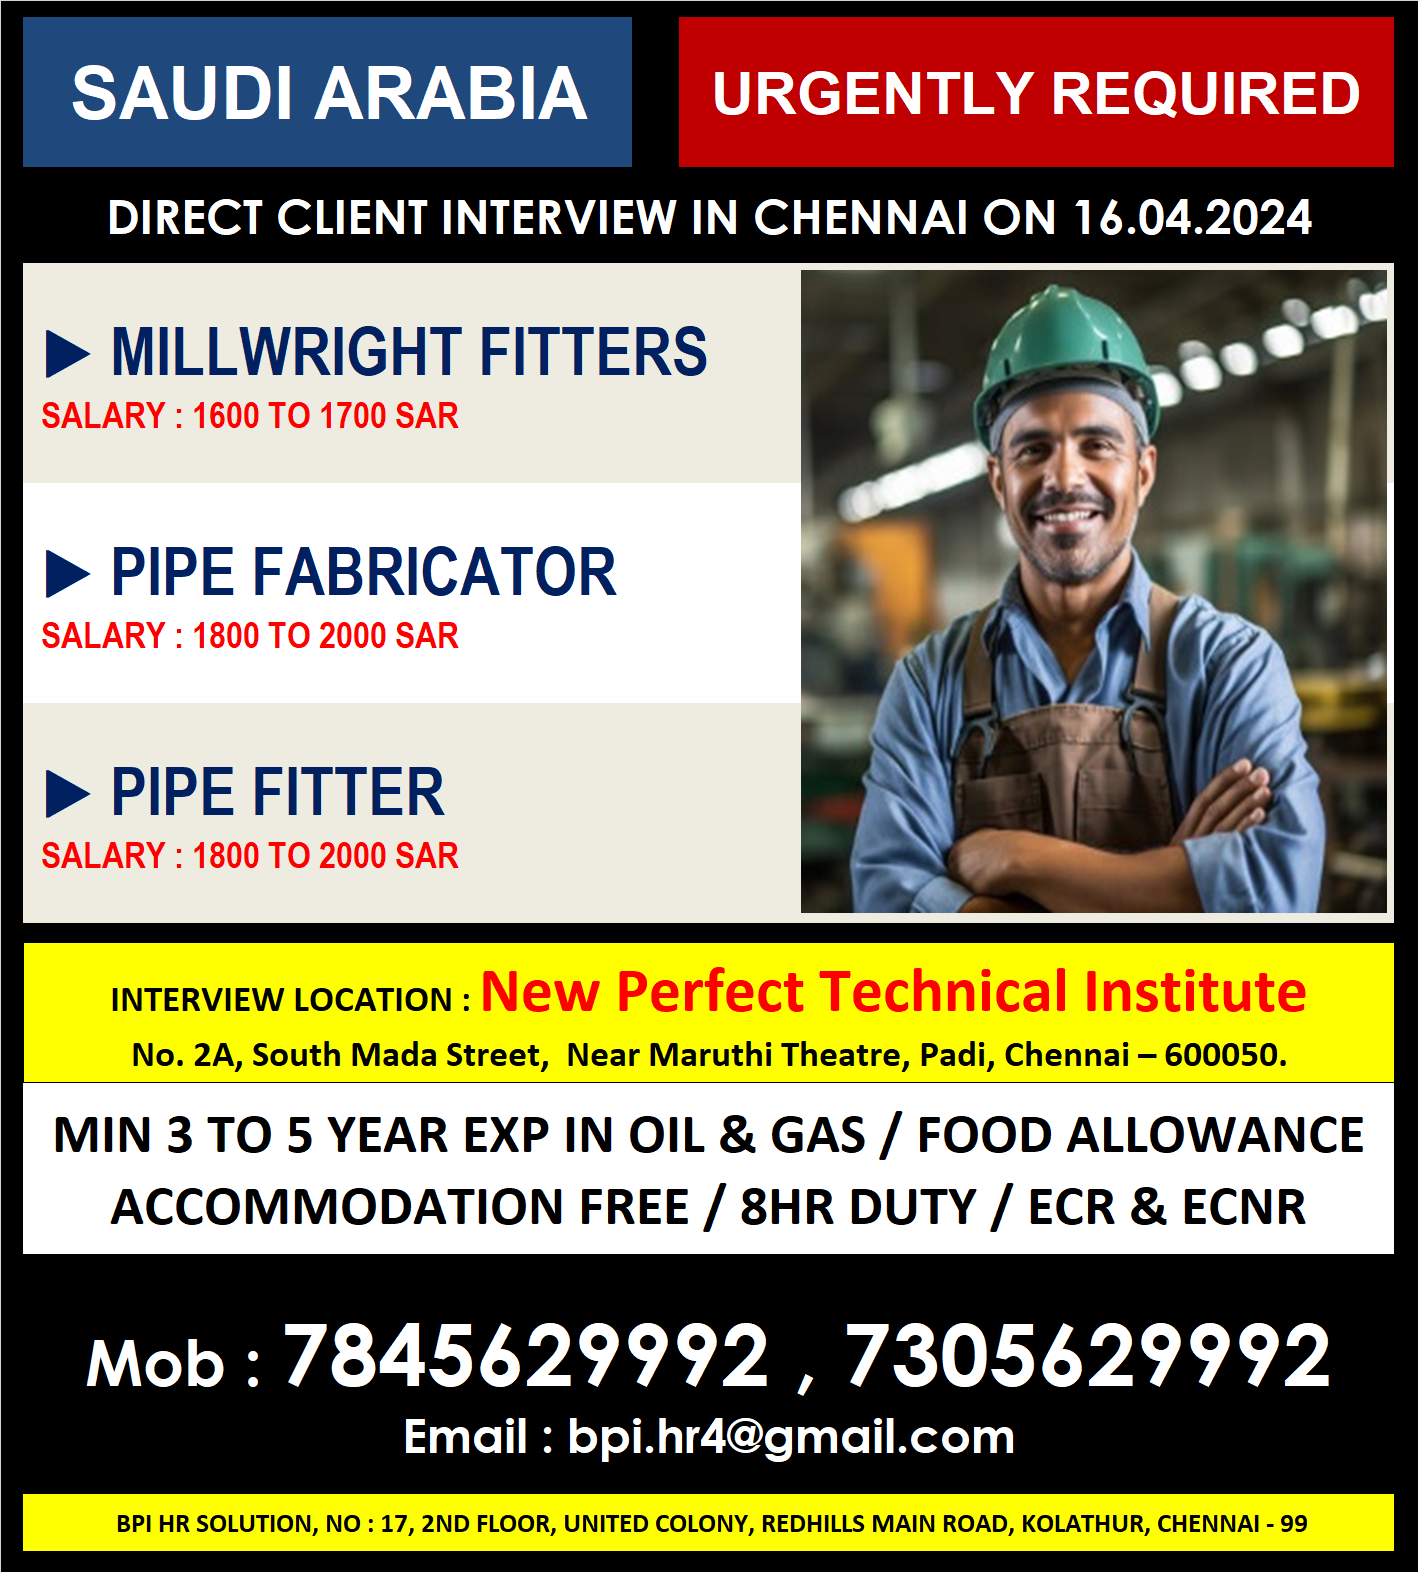 Urgently required for a leading co in ksa client interview in Chennai on 16.04.24